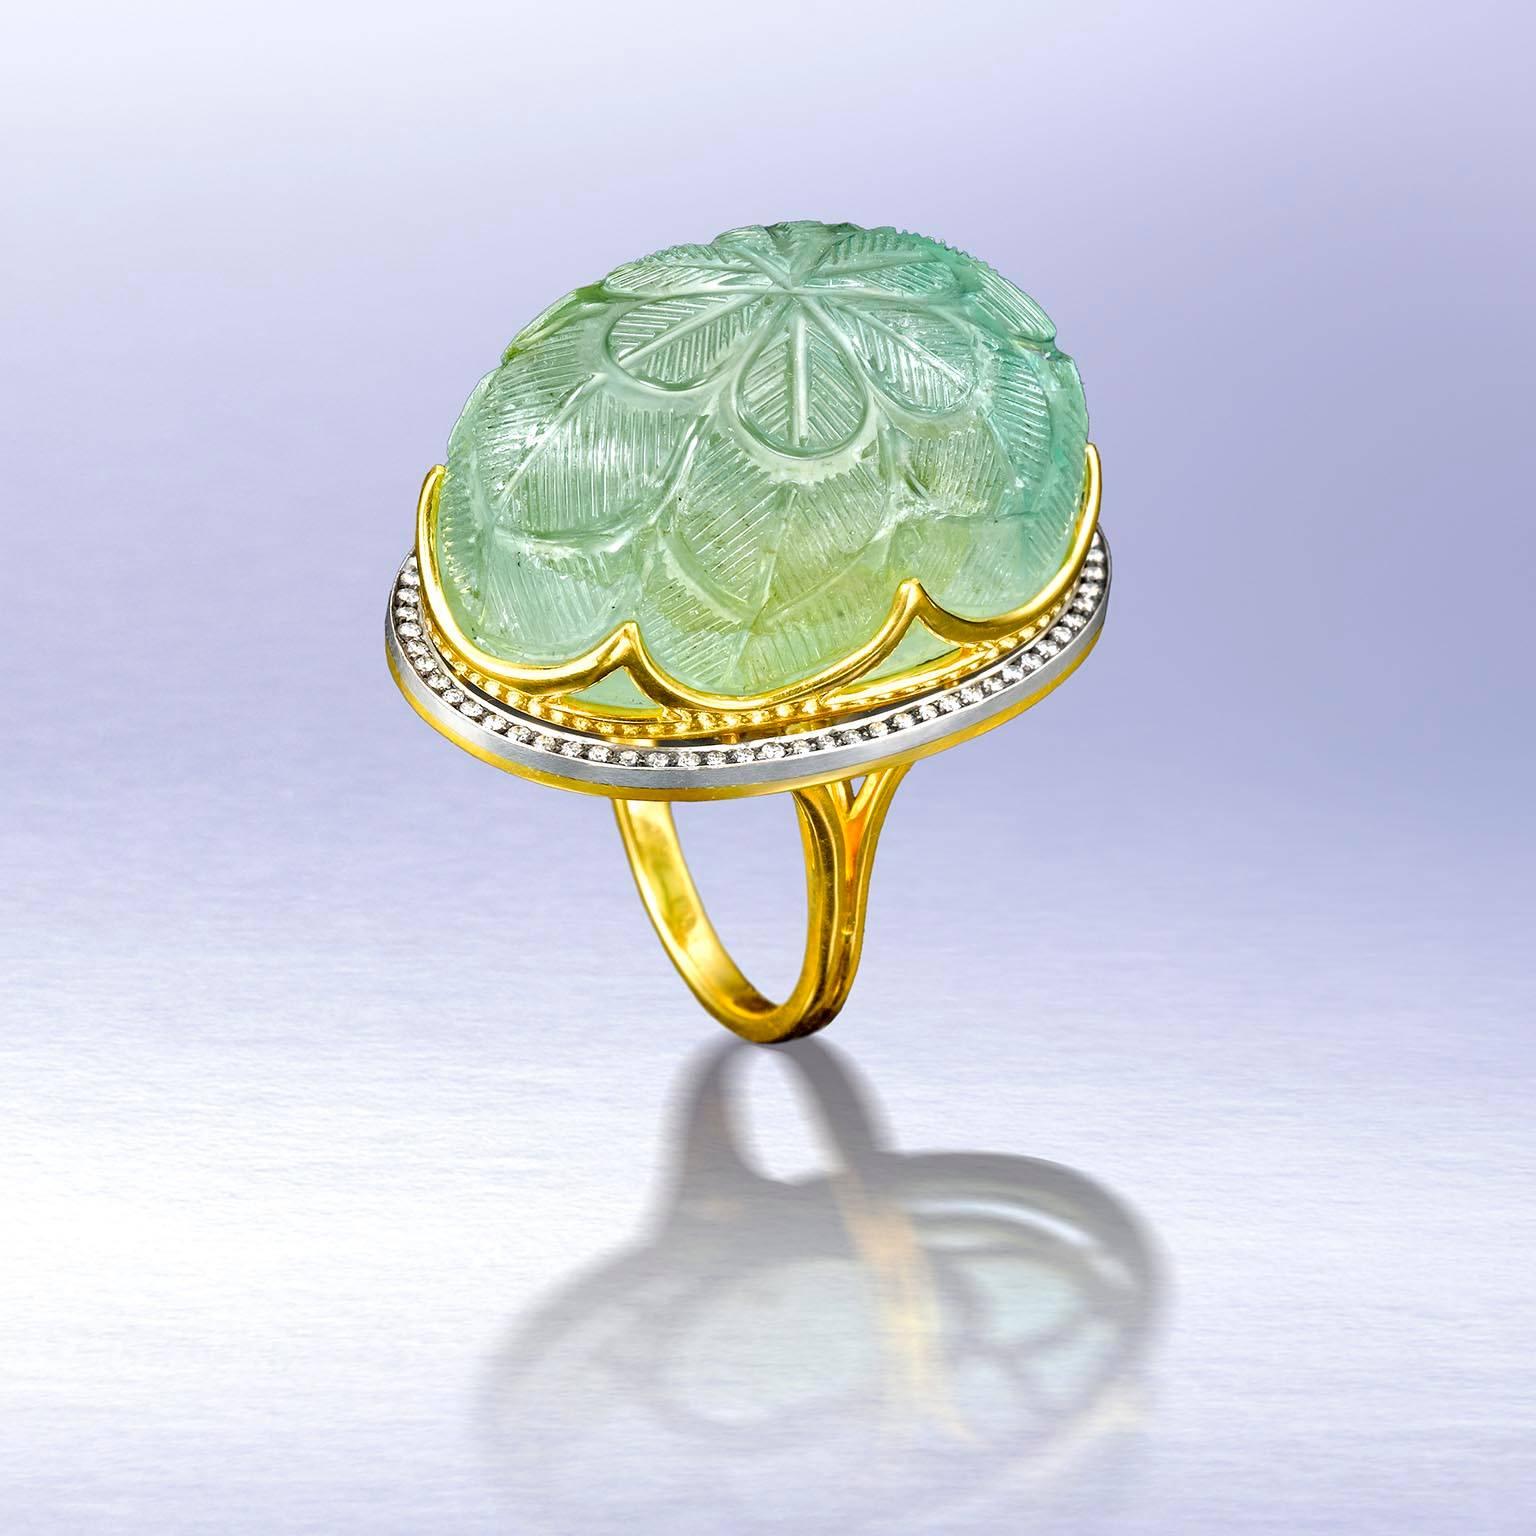 82 carat antique columbian emerald measuring 20 x 28 x16.5 mm. engraved by Moguls this centuries old stone remained unset until now. Set in 23 karat gold crown hovering above paved with diamonds silver and gold ellipse, which hovers above paved